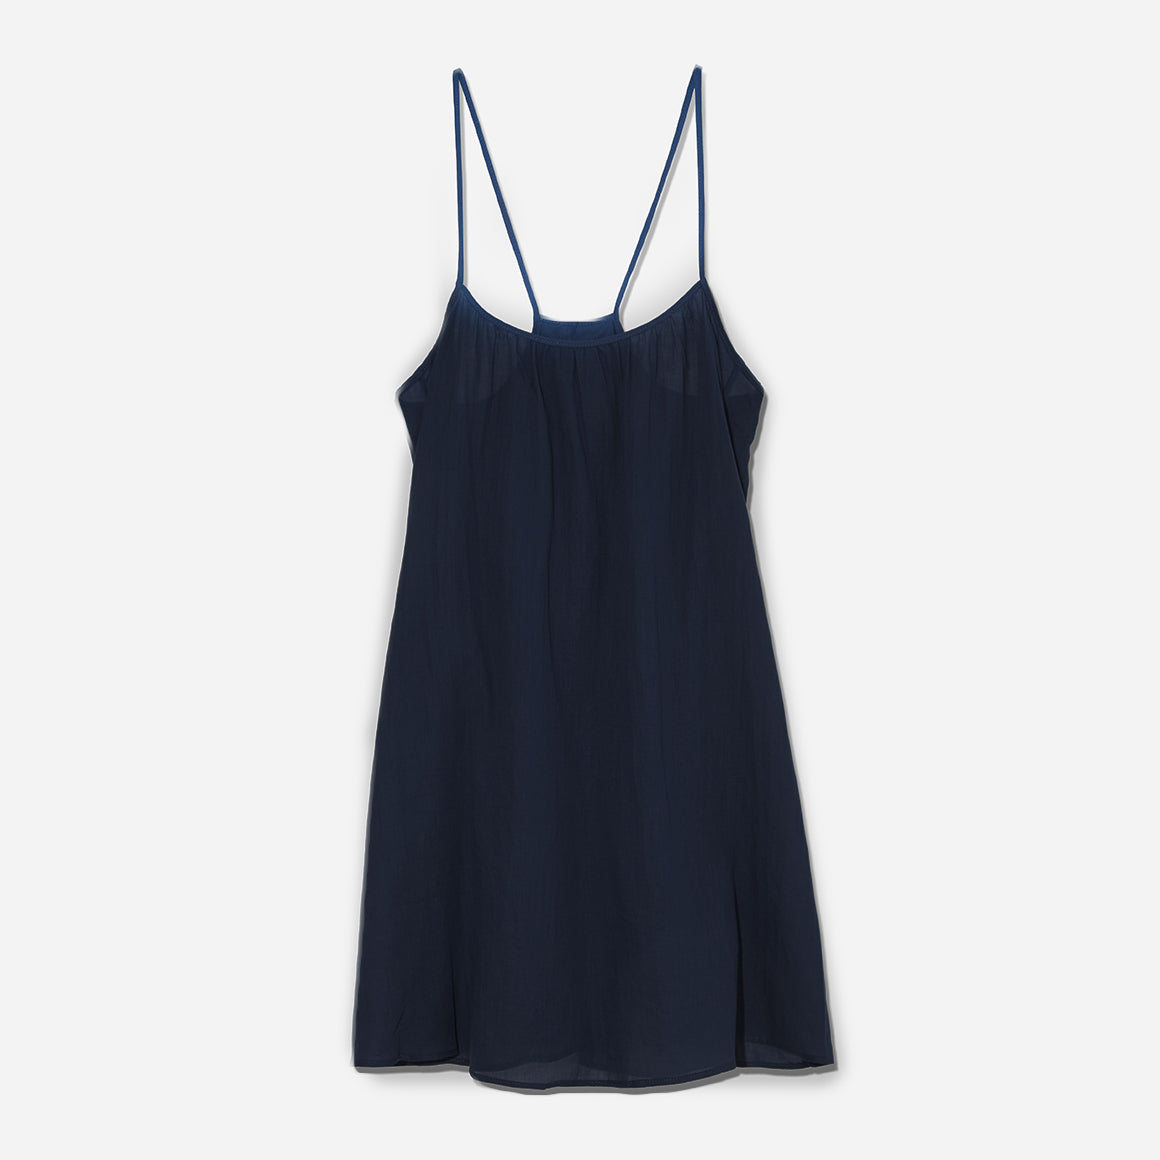  Loup Charmant’s Airy Cotton Mini Slip dress in navy. A semi-sheer slip with spaghetti straps and a rounded neckline. 